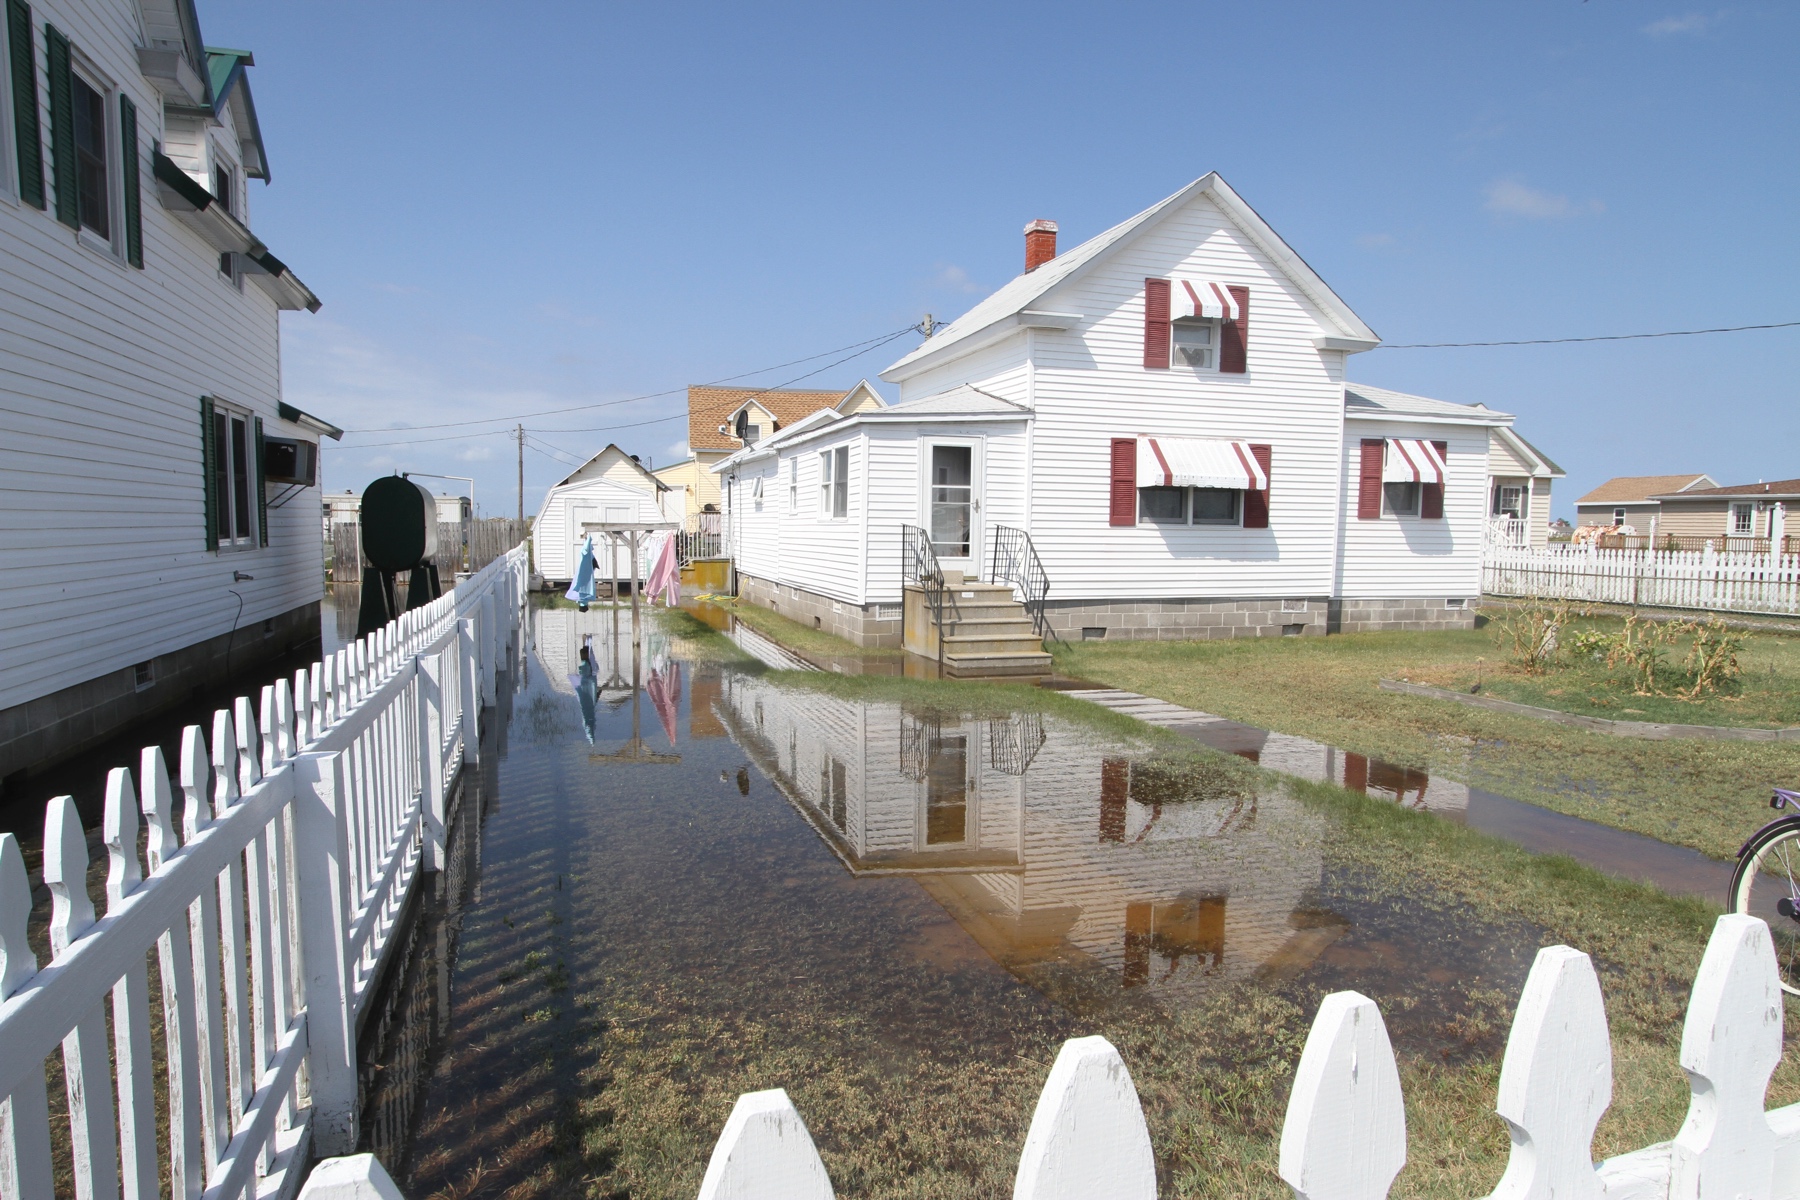 Town of Tangier occupied housing flooding at spring tide and recent precipitation. Note that the house has been raised, the walkway has not and is currently flooded. Most of the yard of the property has been converted to wetlands. Source: USACE, Norfolk District, Patrick Bloodgood, photographer.